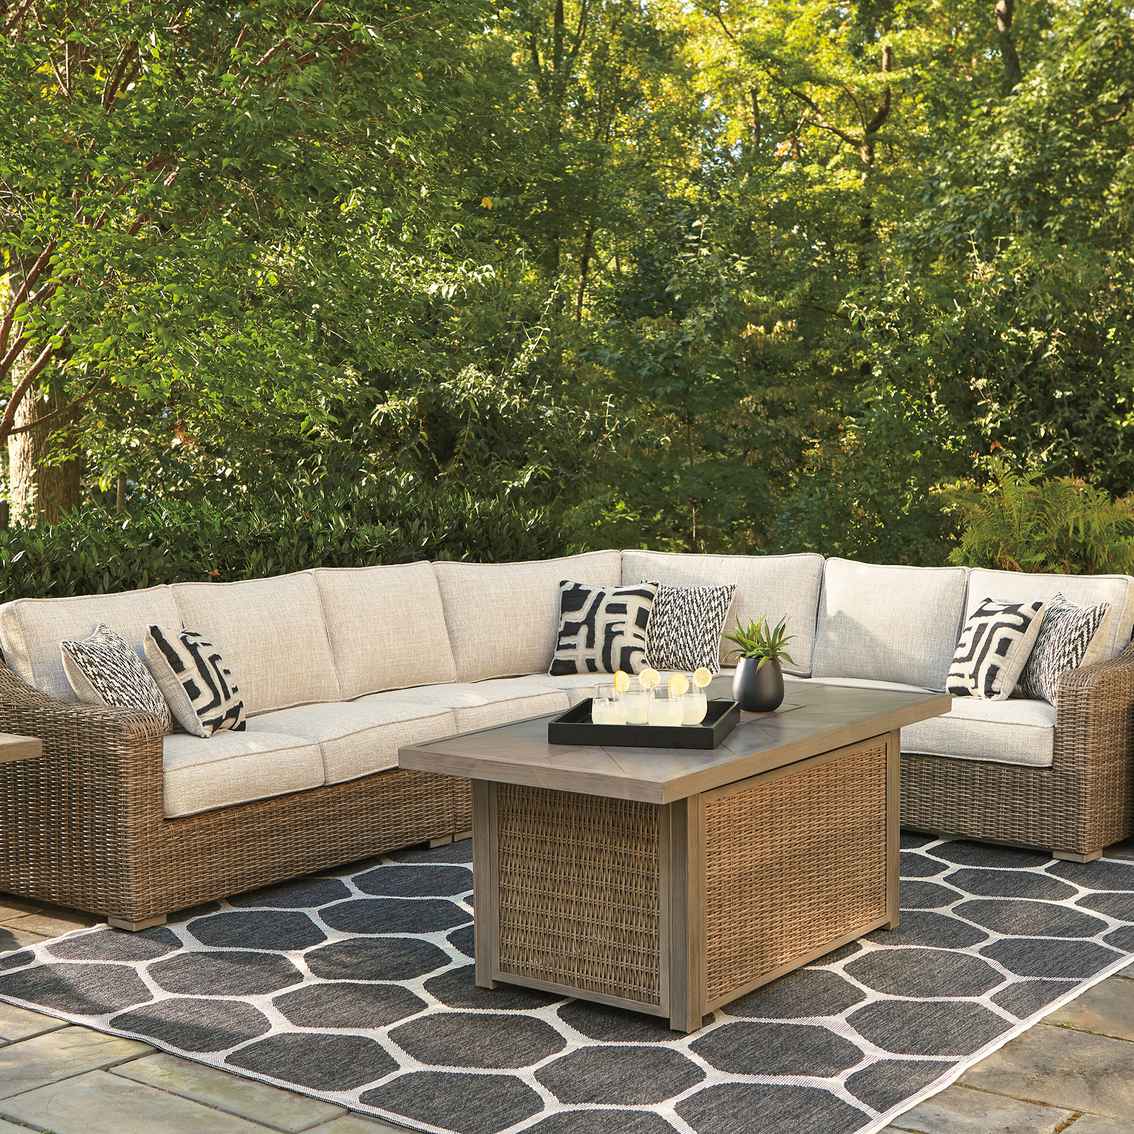 Signature Design by Ashley Beachcroft 5 pc. Outdoor Sectional - Image 2 of 4